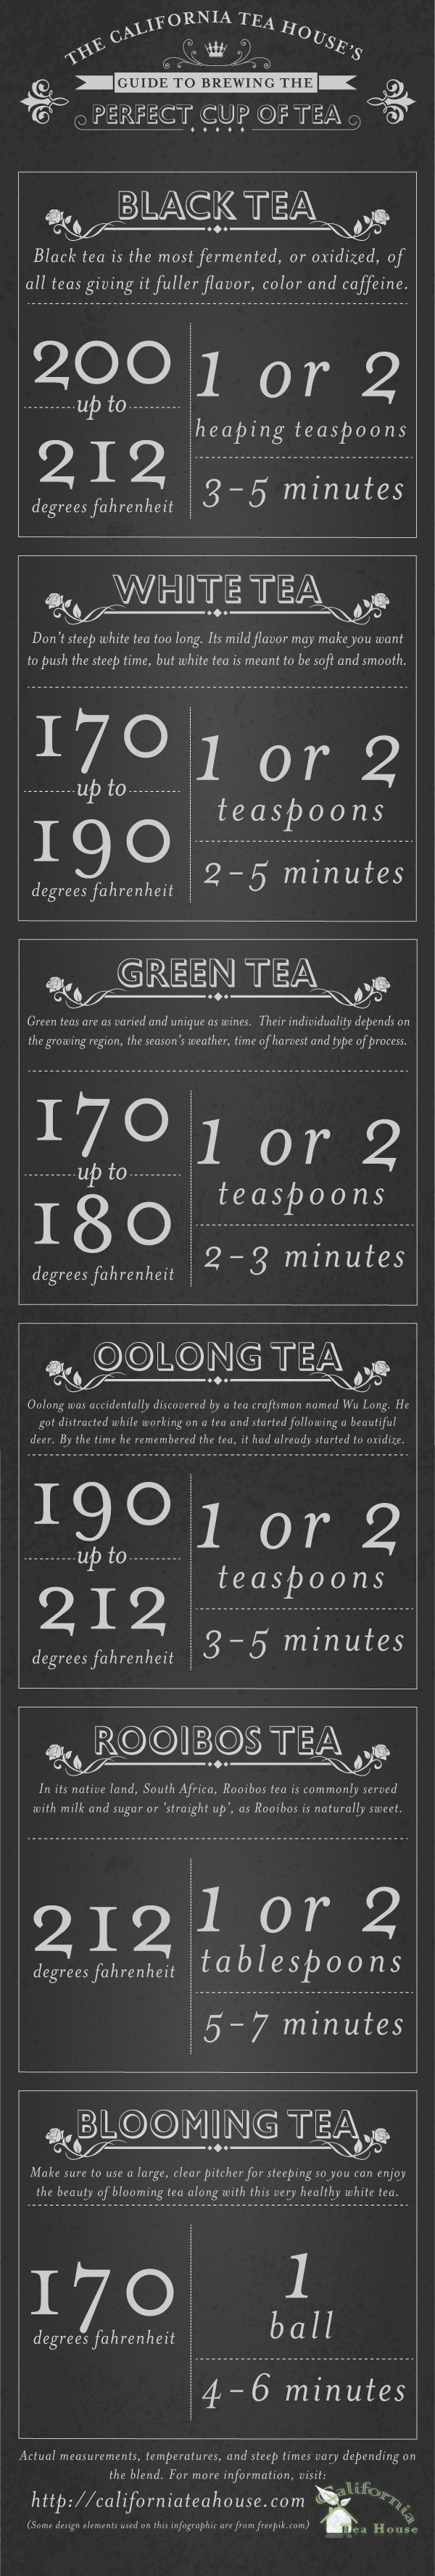 California-Tea-House-How-to-Brew-the-Perfect-Cup-of-Tea